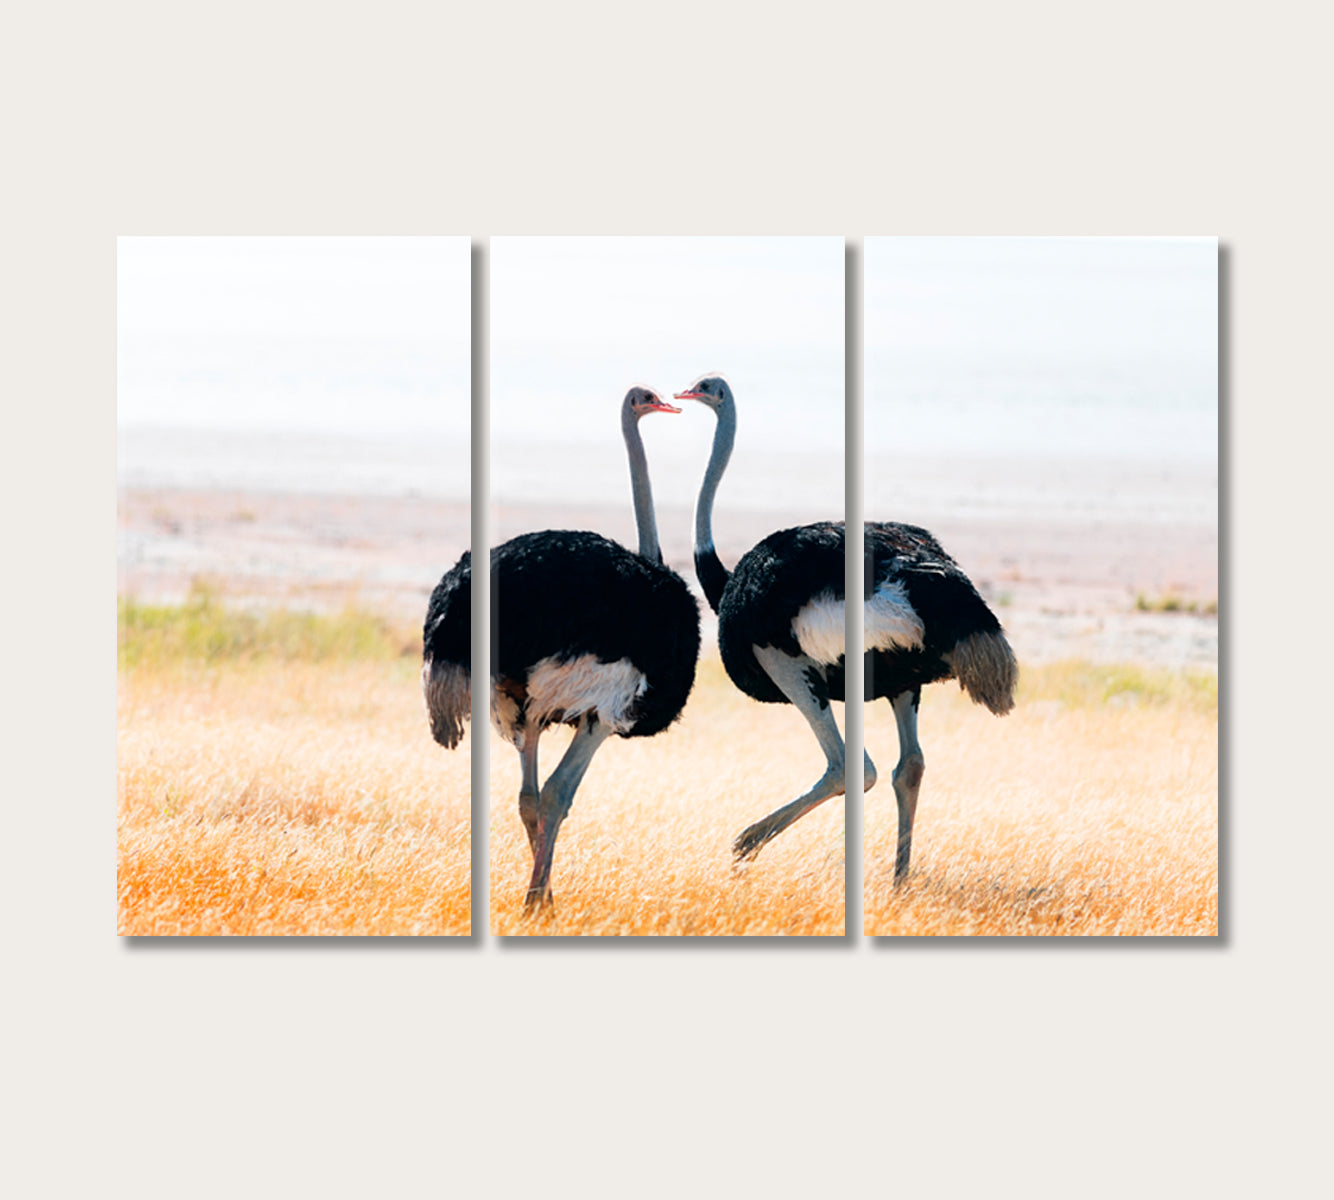 Ostriches Couple in Etosha National Park Namibia Africa Canvas Print-Canvas Print-CetArt-3 Panels-36x24 inches-CetArt